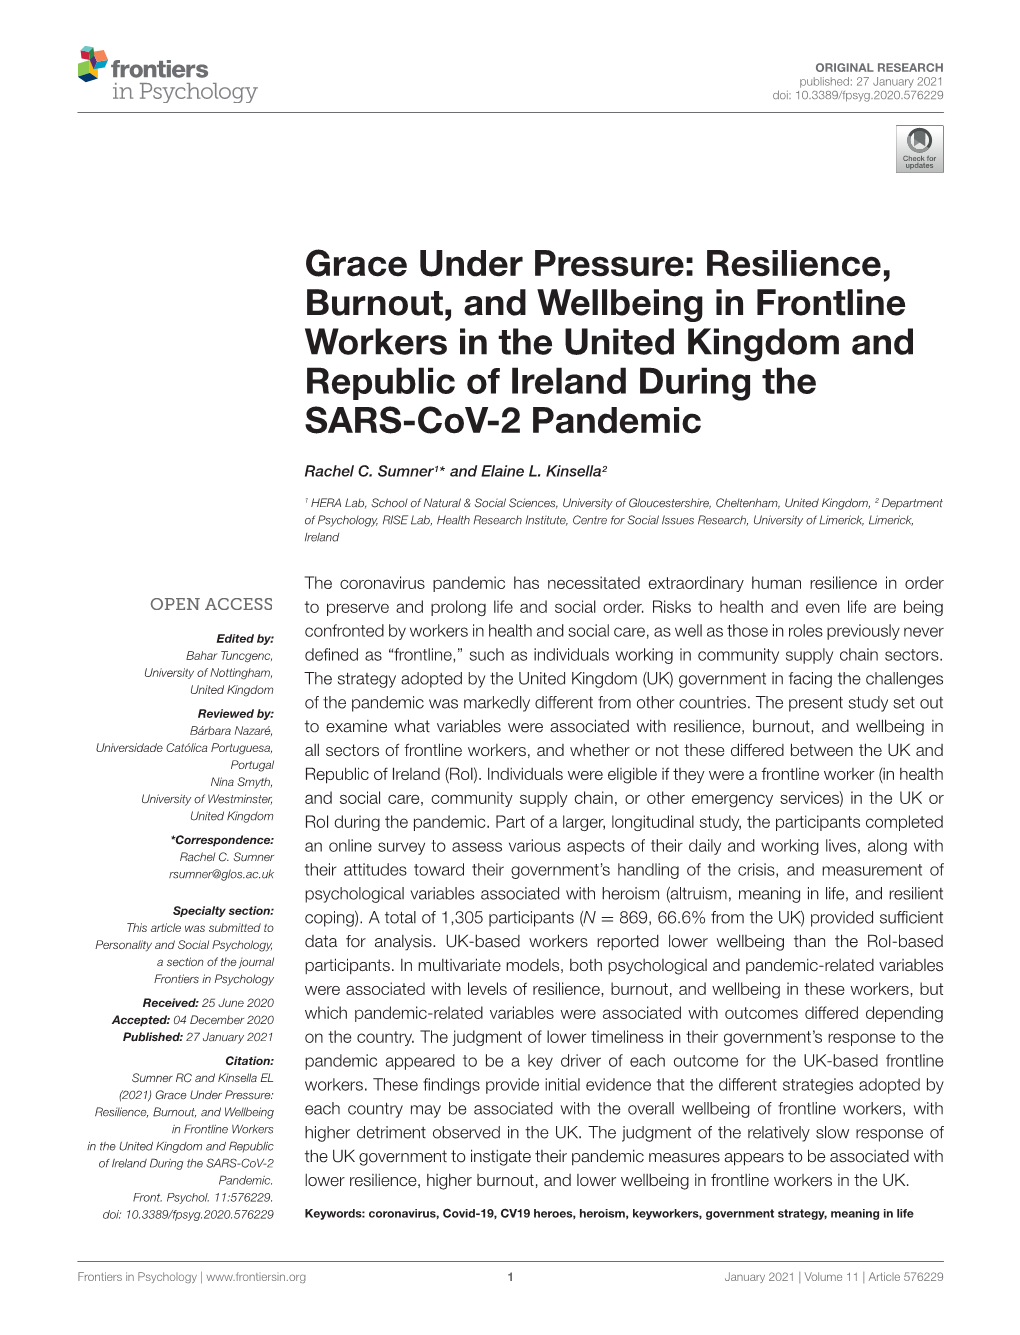 Resilience, Burnout, and Wellbeing in Frontline Workers in the United Kingdom and Republic of Ireland During the SARS-Cov-2 Pandemic